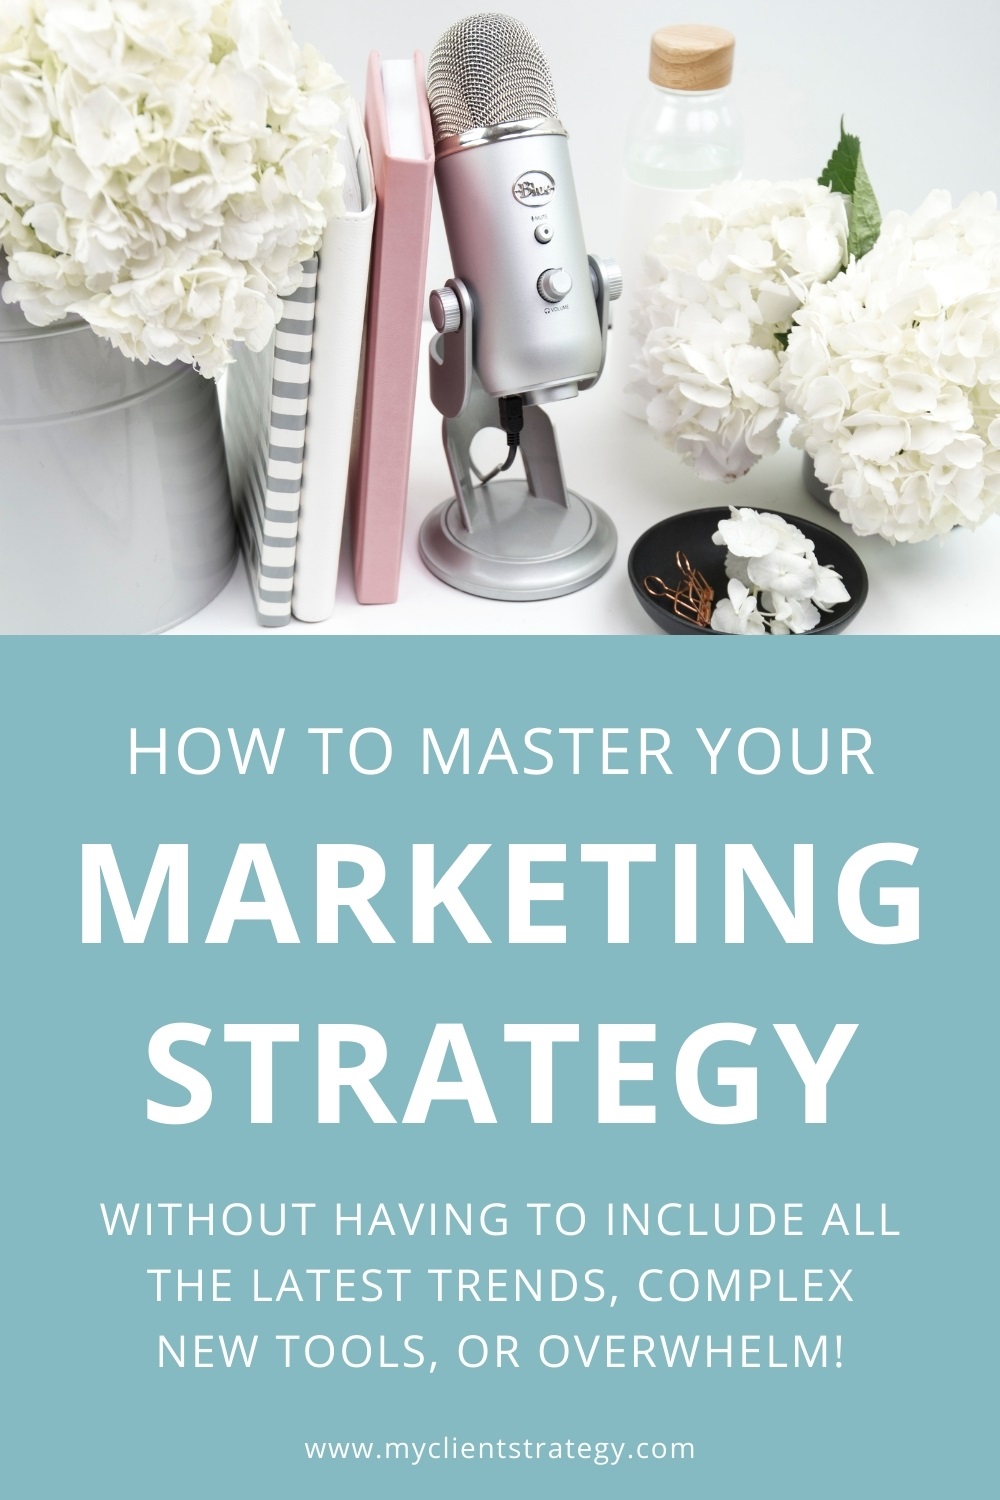 How to master your marketing strategy without the latest trends